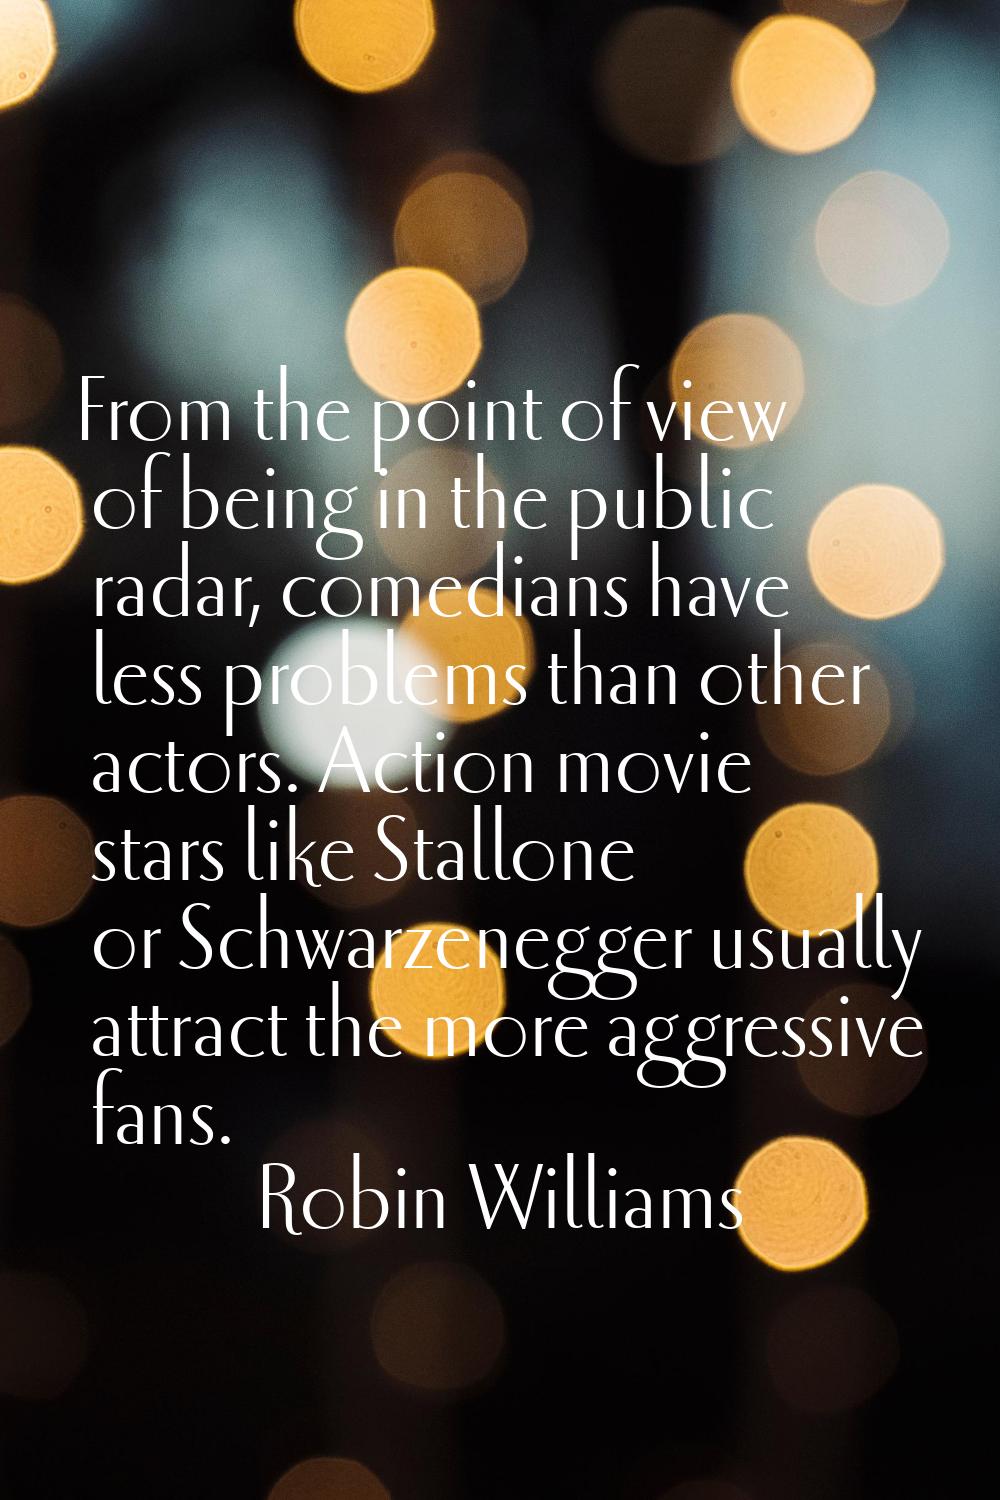 From the point of view of being in the public radar, comedians have less problems than other actors